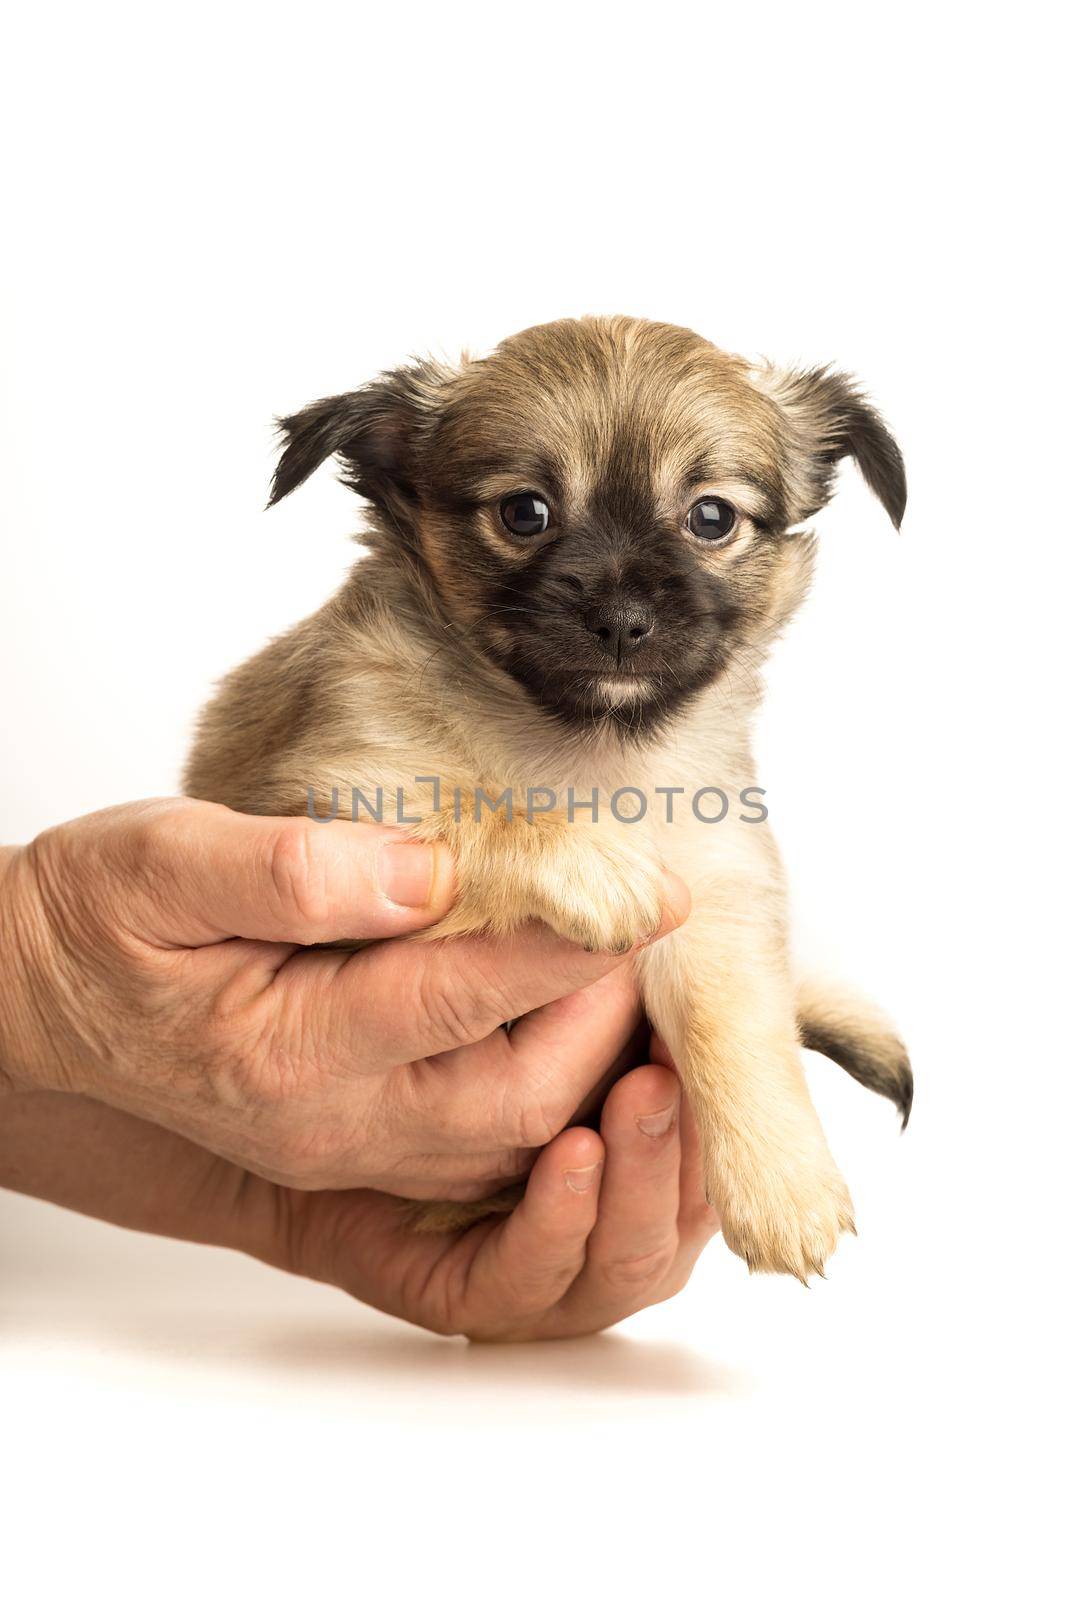 Cute little chihuahua puppy isolated in white background held in human hands